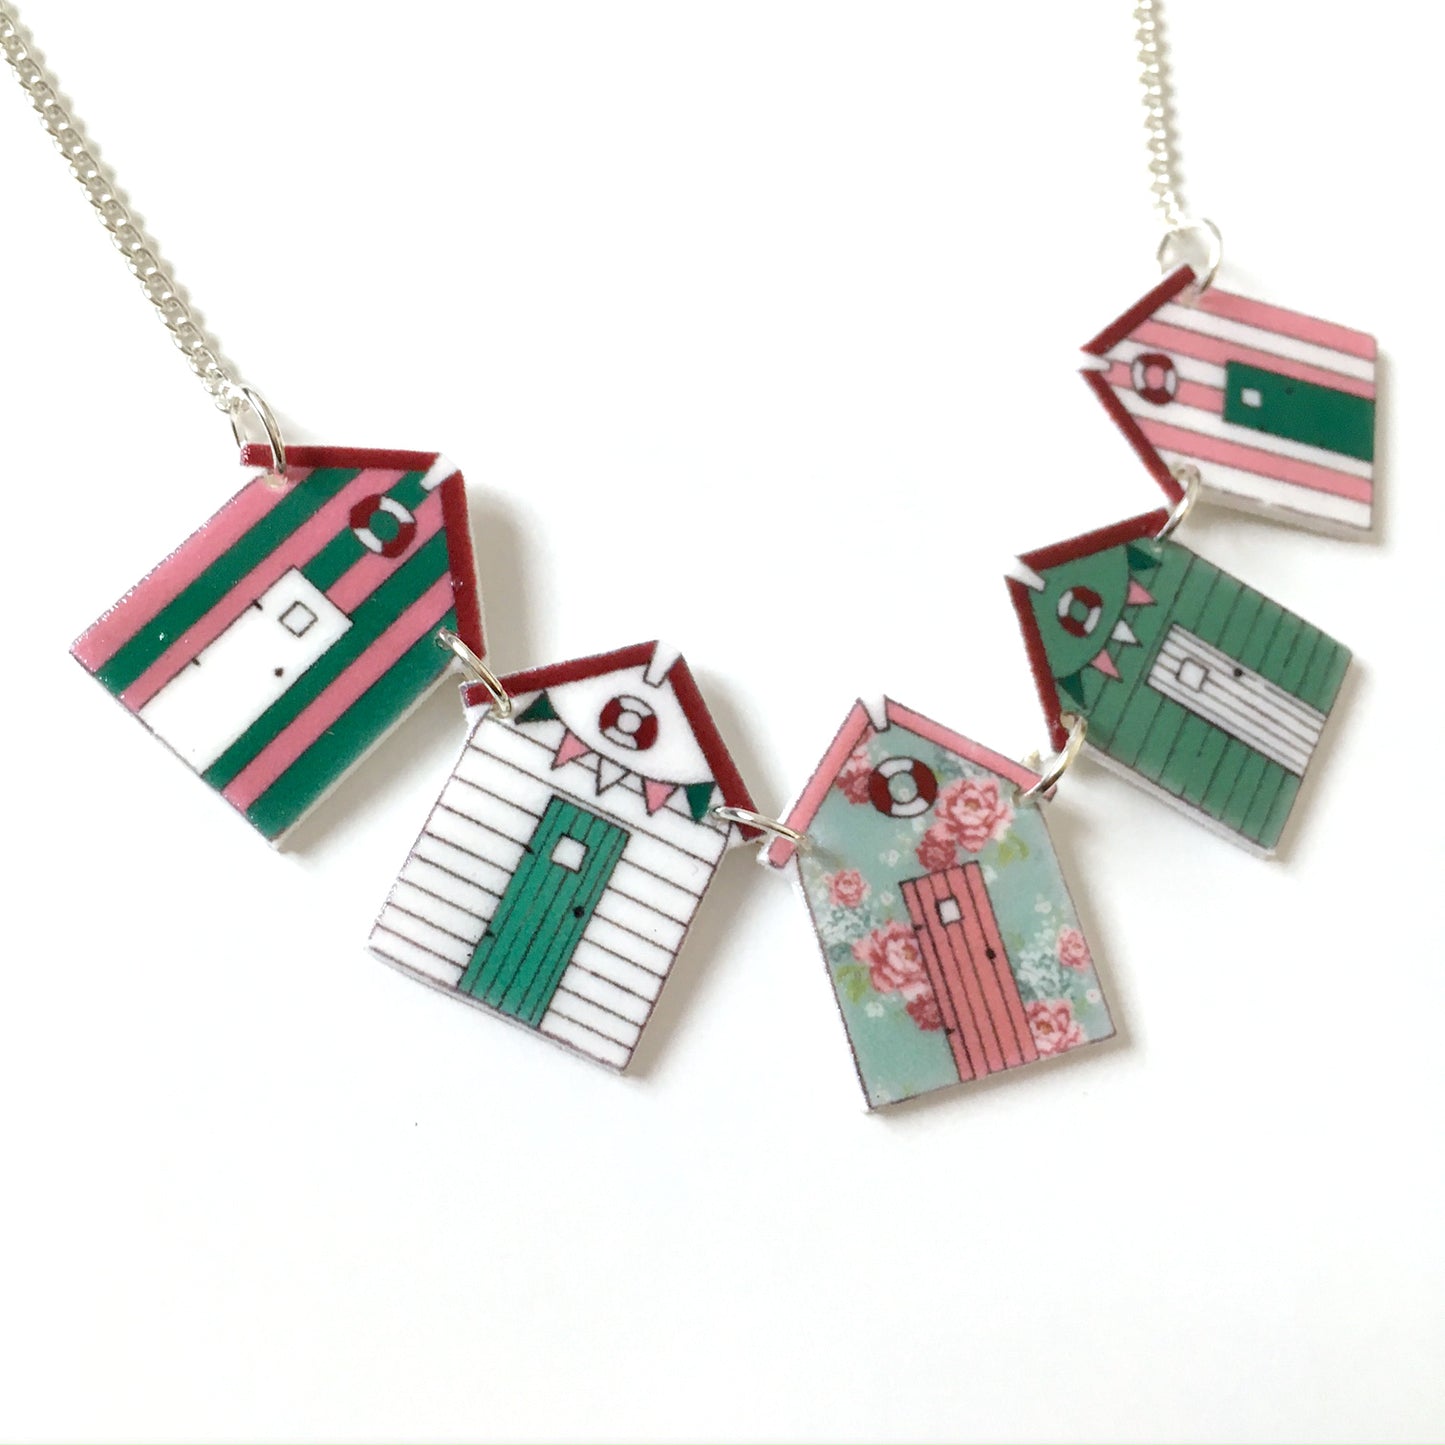 Floral beach hut bunting necklace - Summer jewellery